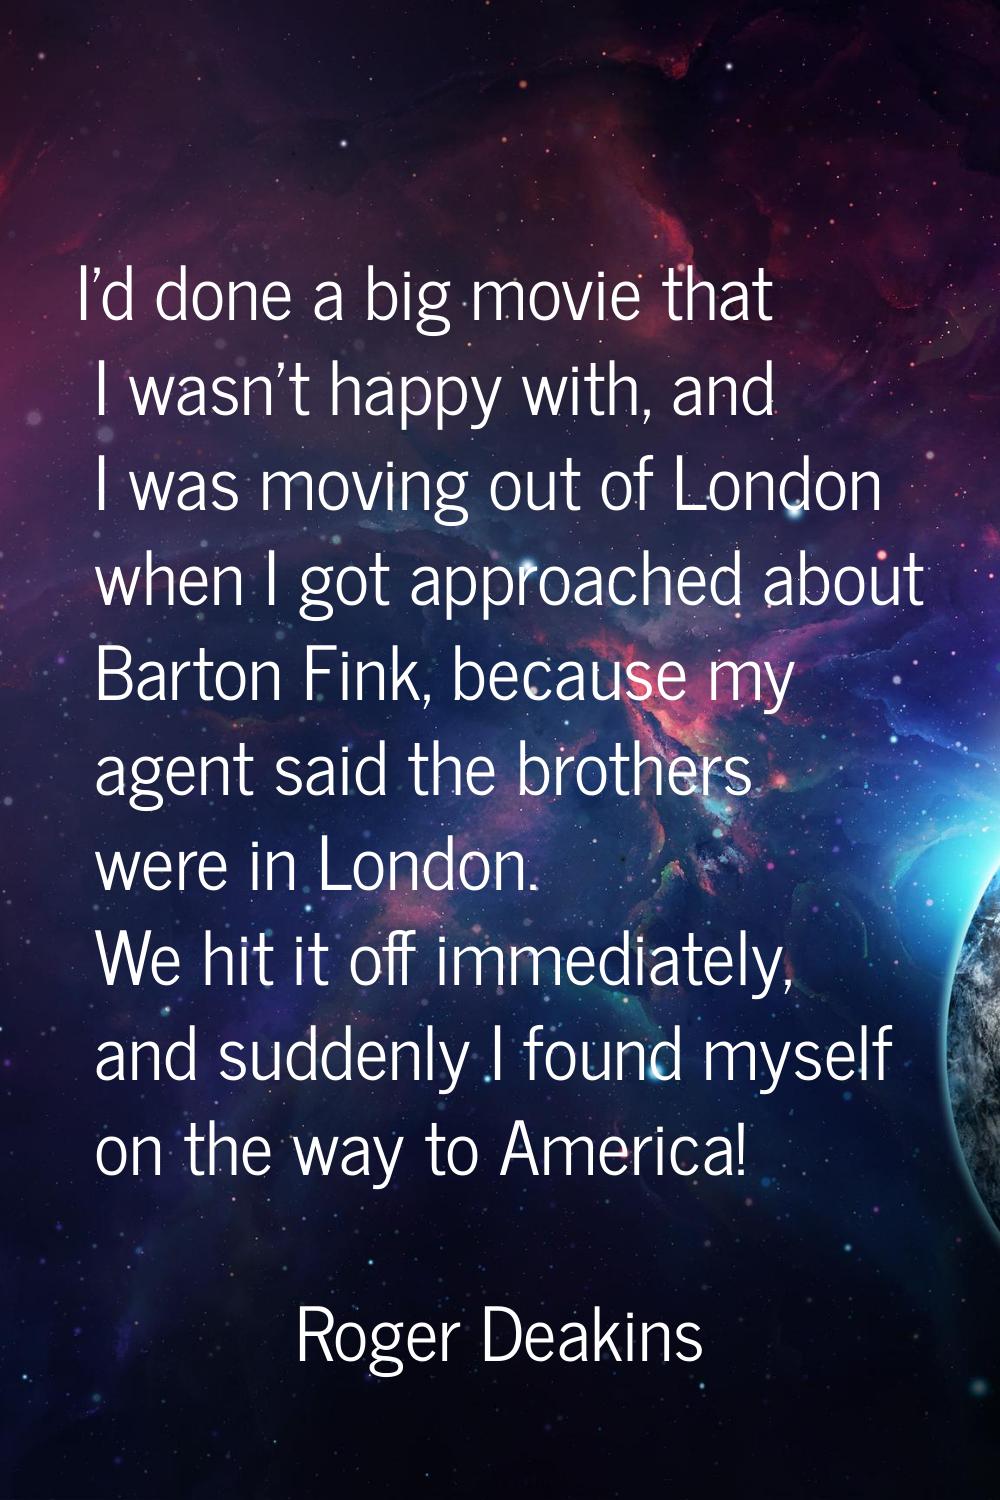 I'd done a big movie that I wasn't happy with, and I was moving out of London when I got approached